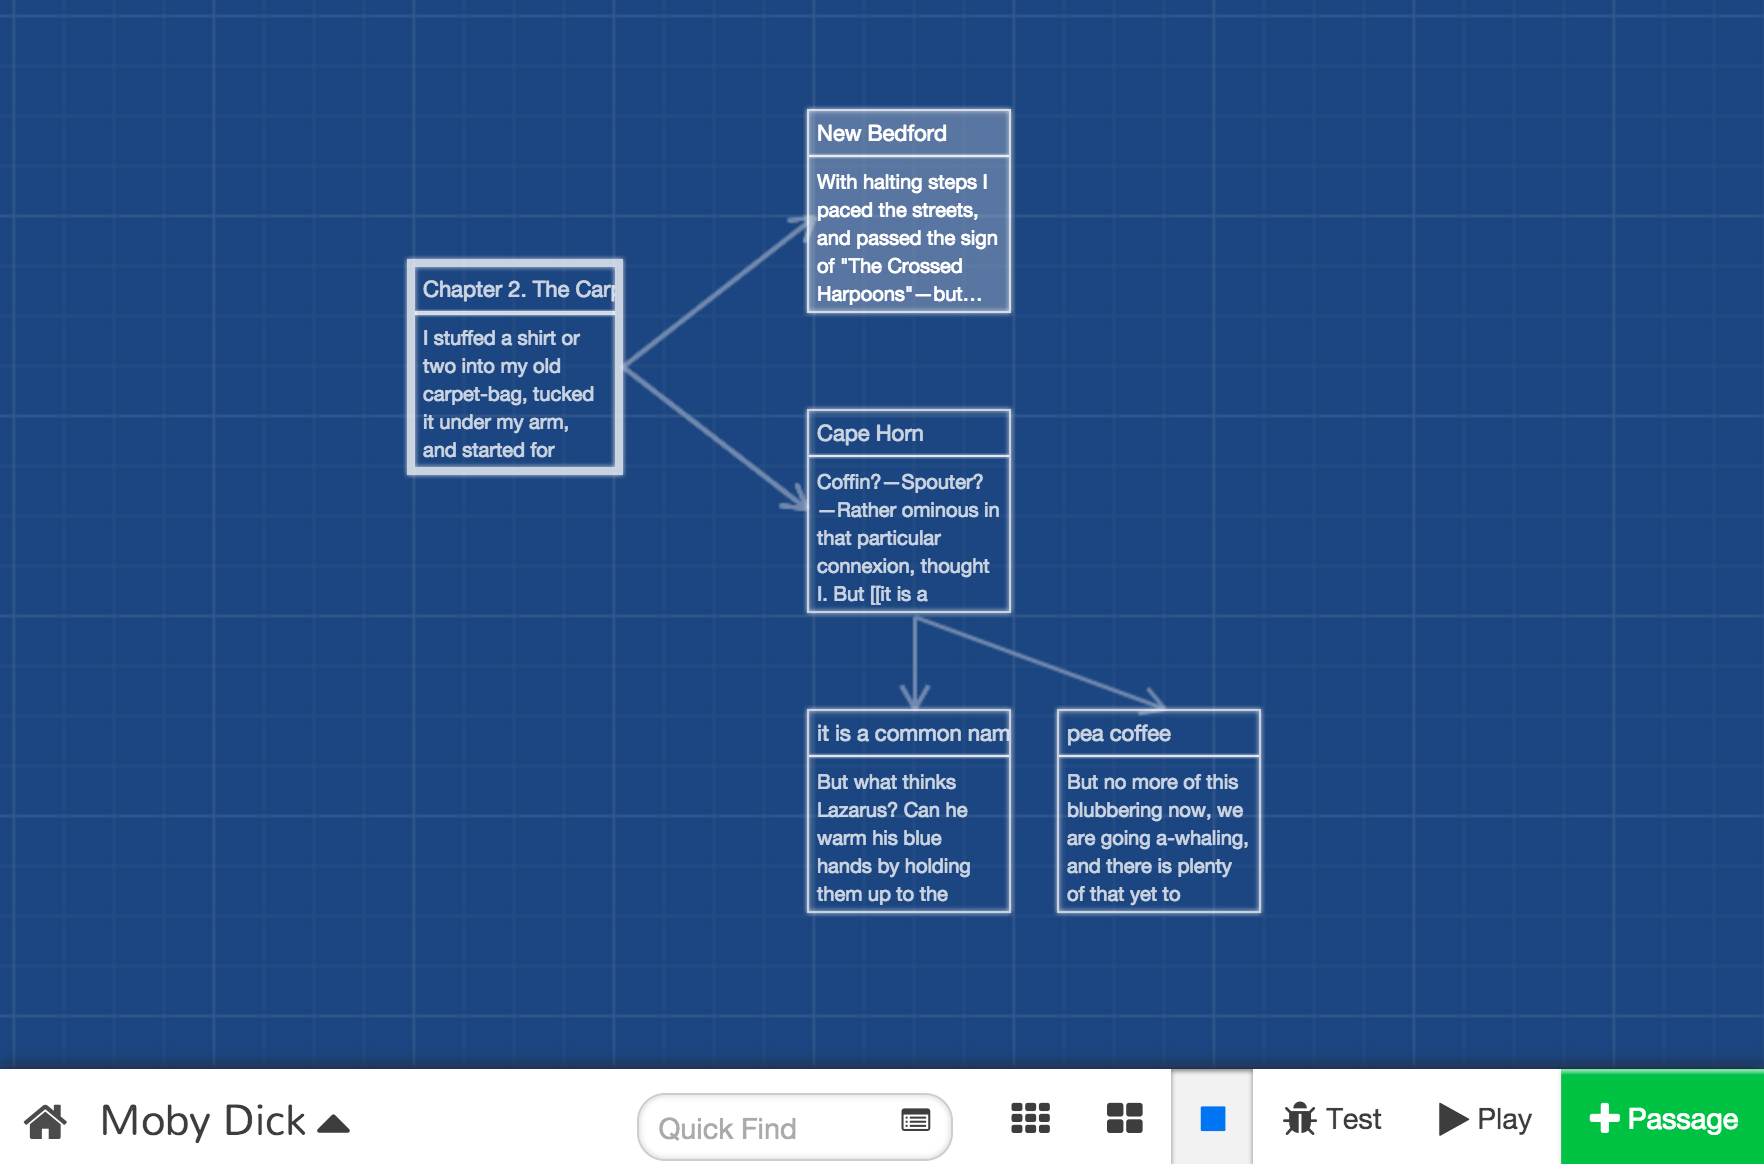 Twine offers a flow chart view for planning your interactive video